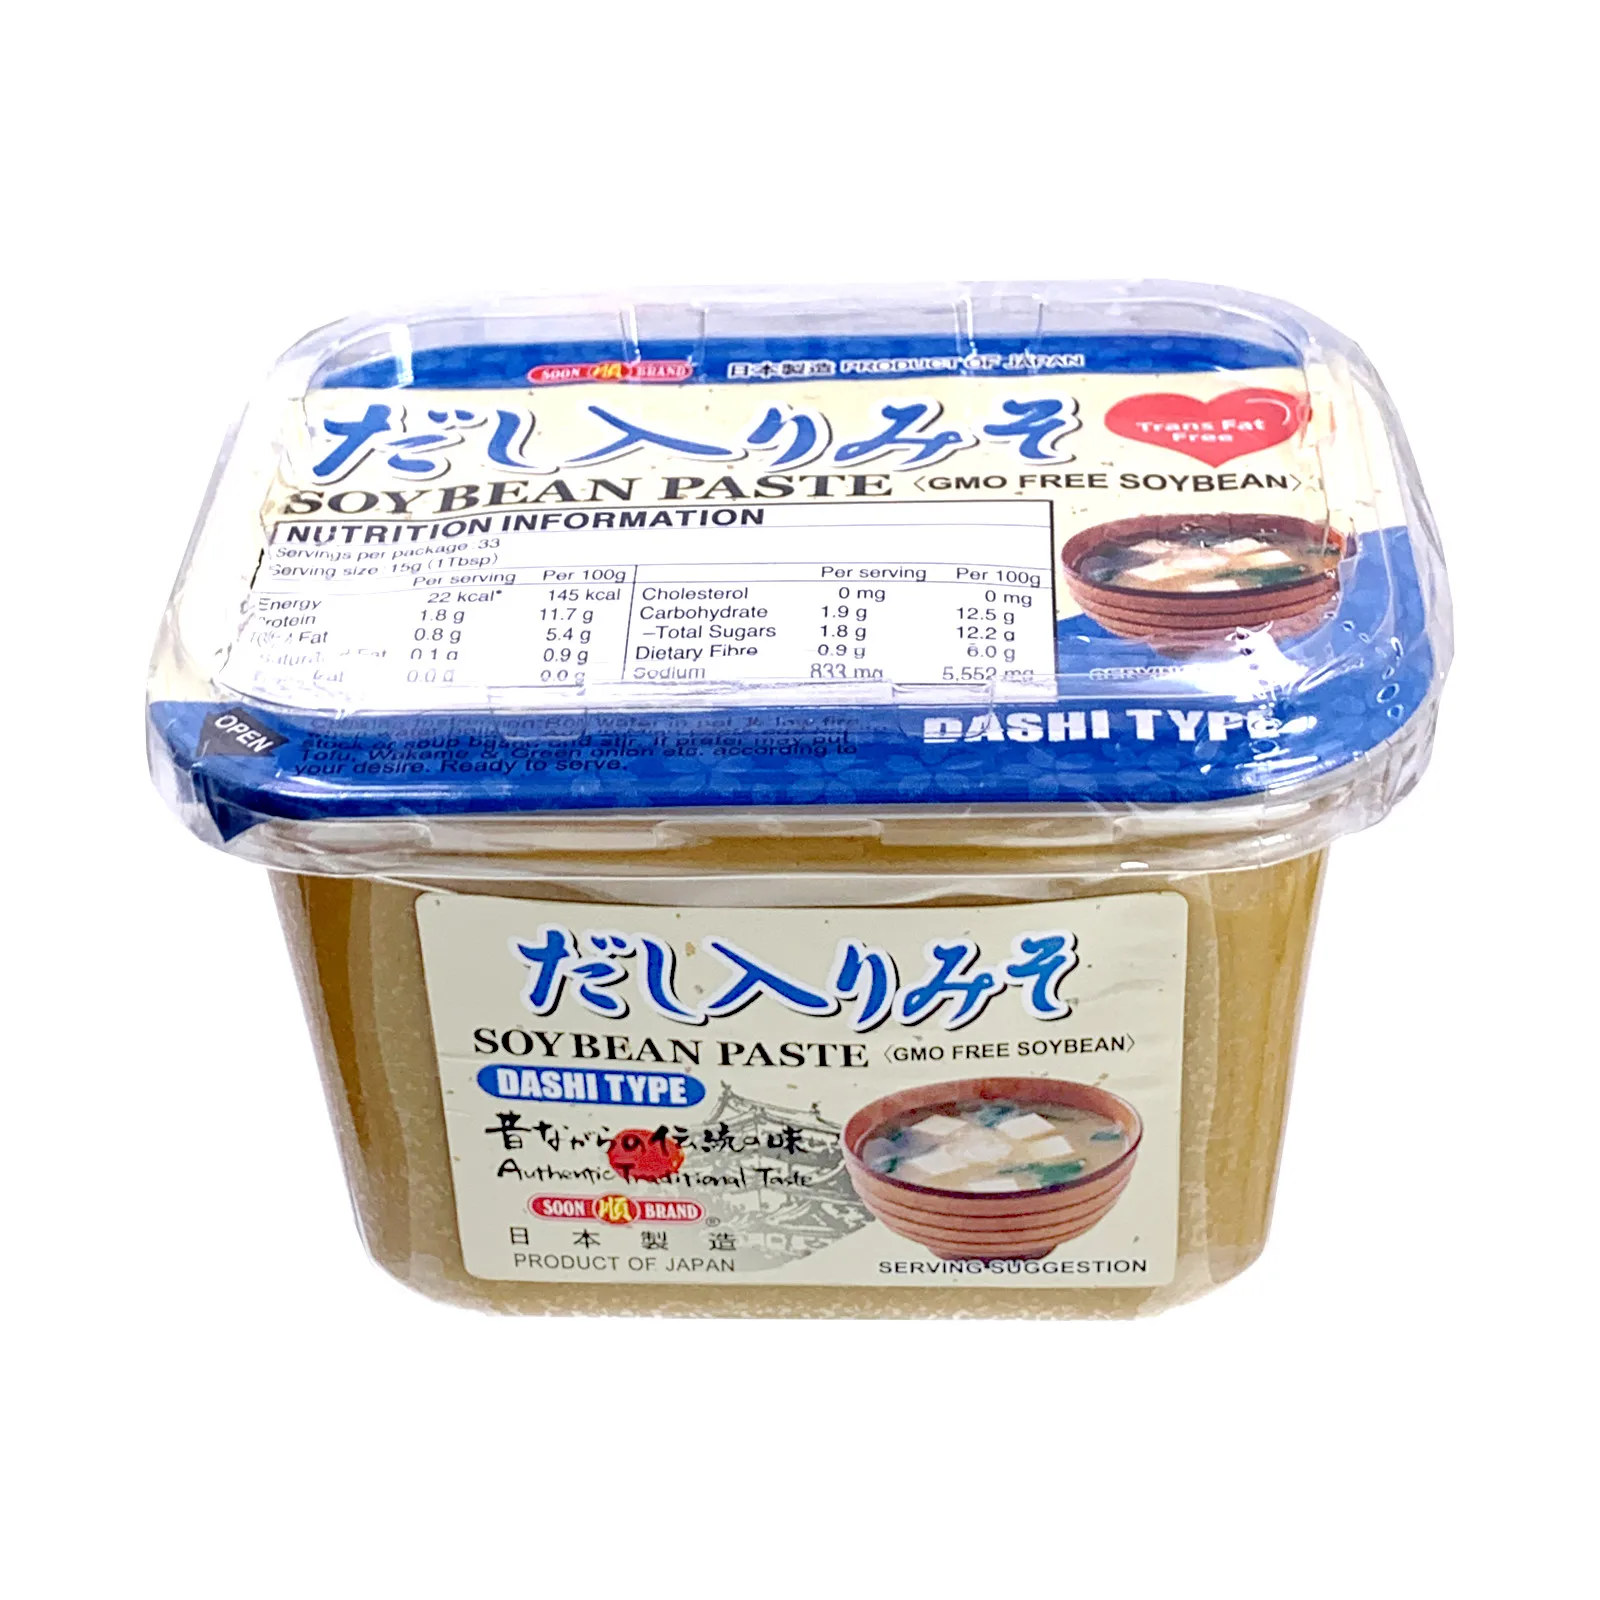 GMO Free Soybean Rice Miso Soup Paste Natural Color Ambient Traditional Seasoning Authentic Taste Dashi Iri Miso made in Japan